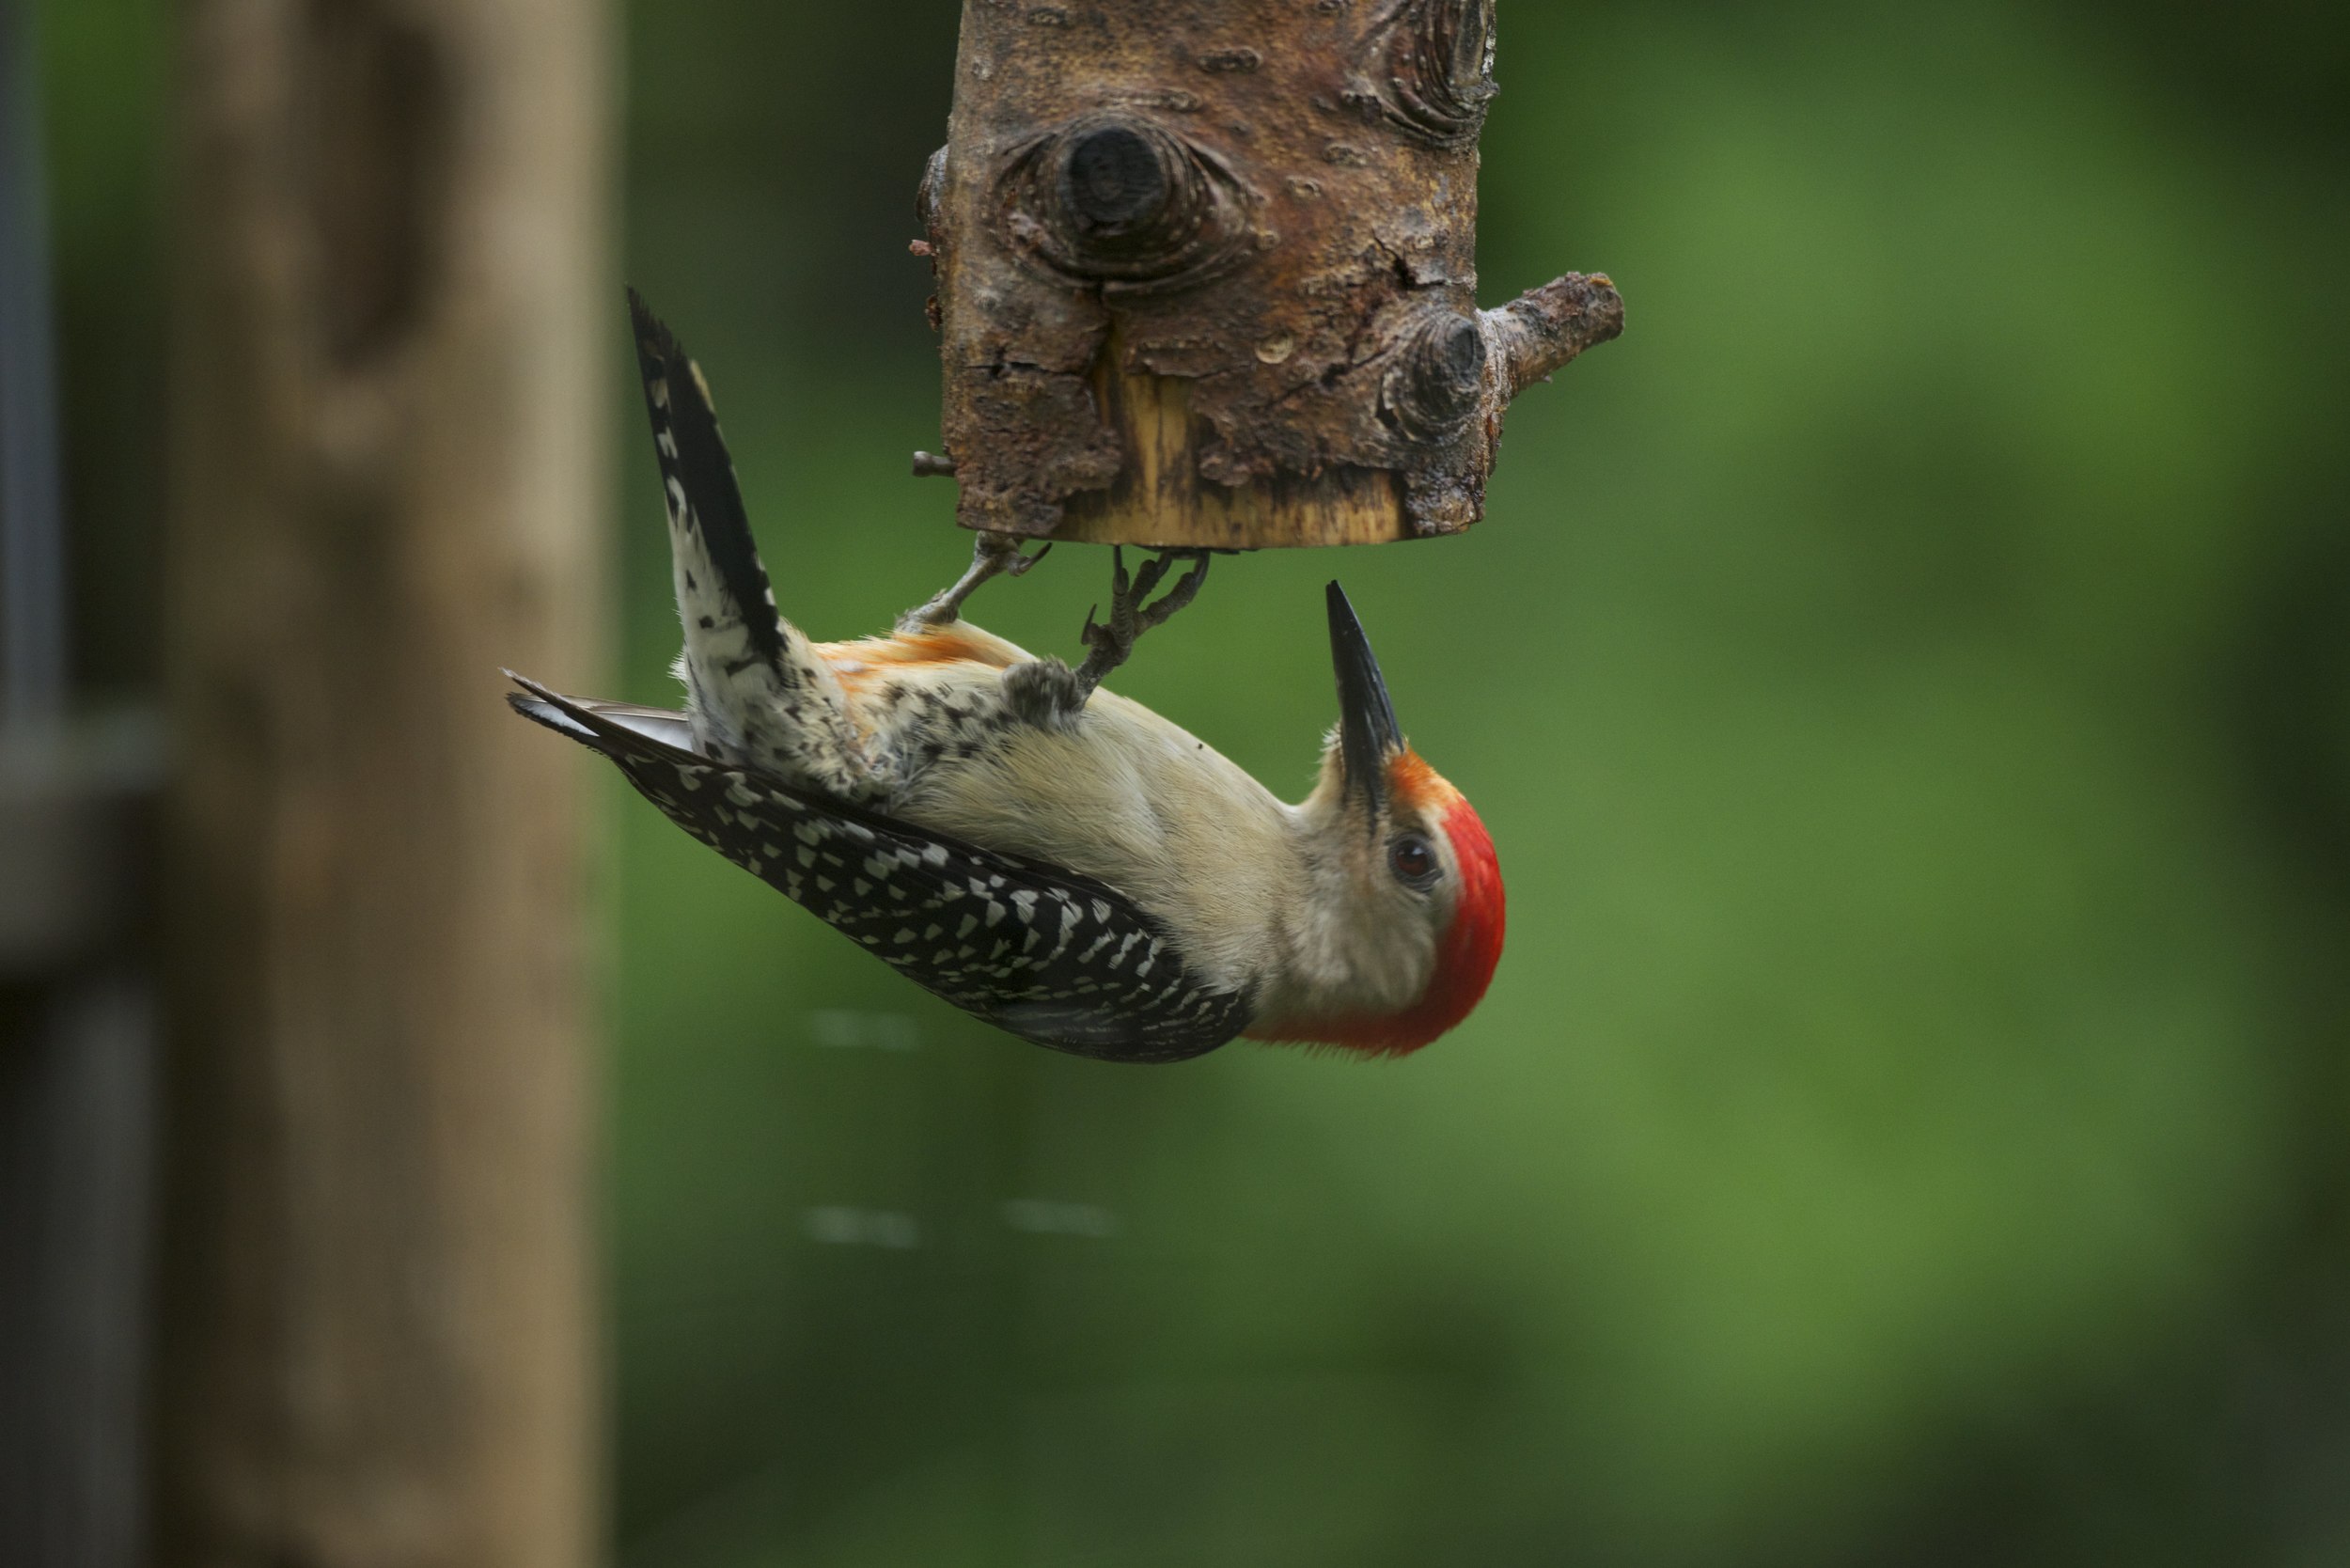  Many birds such as this Red-bellied Woodpecker feed very naturally by hanging upside down to use this feeder. 